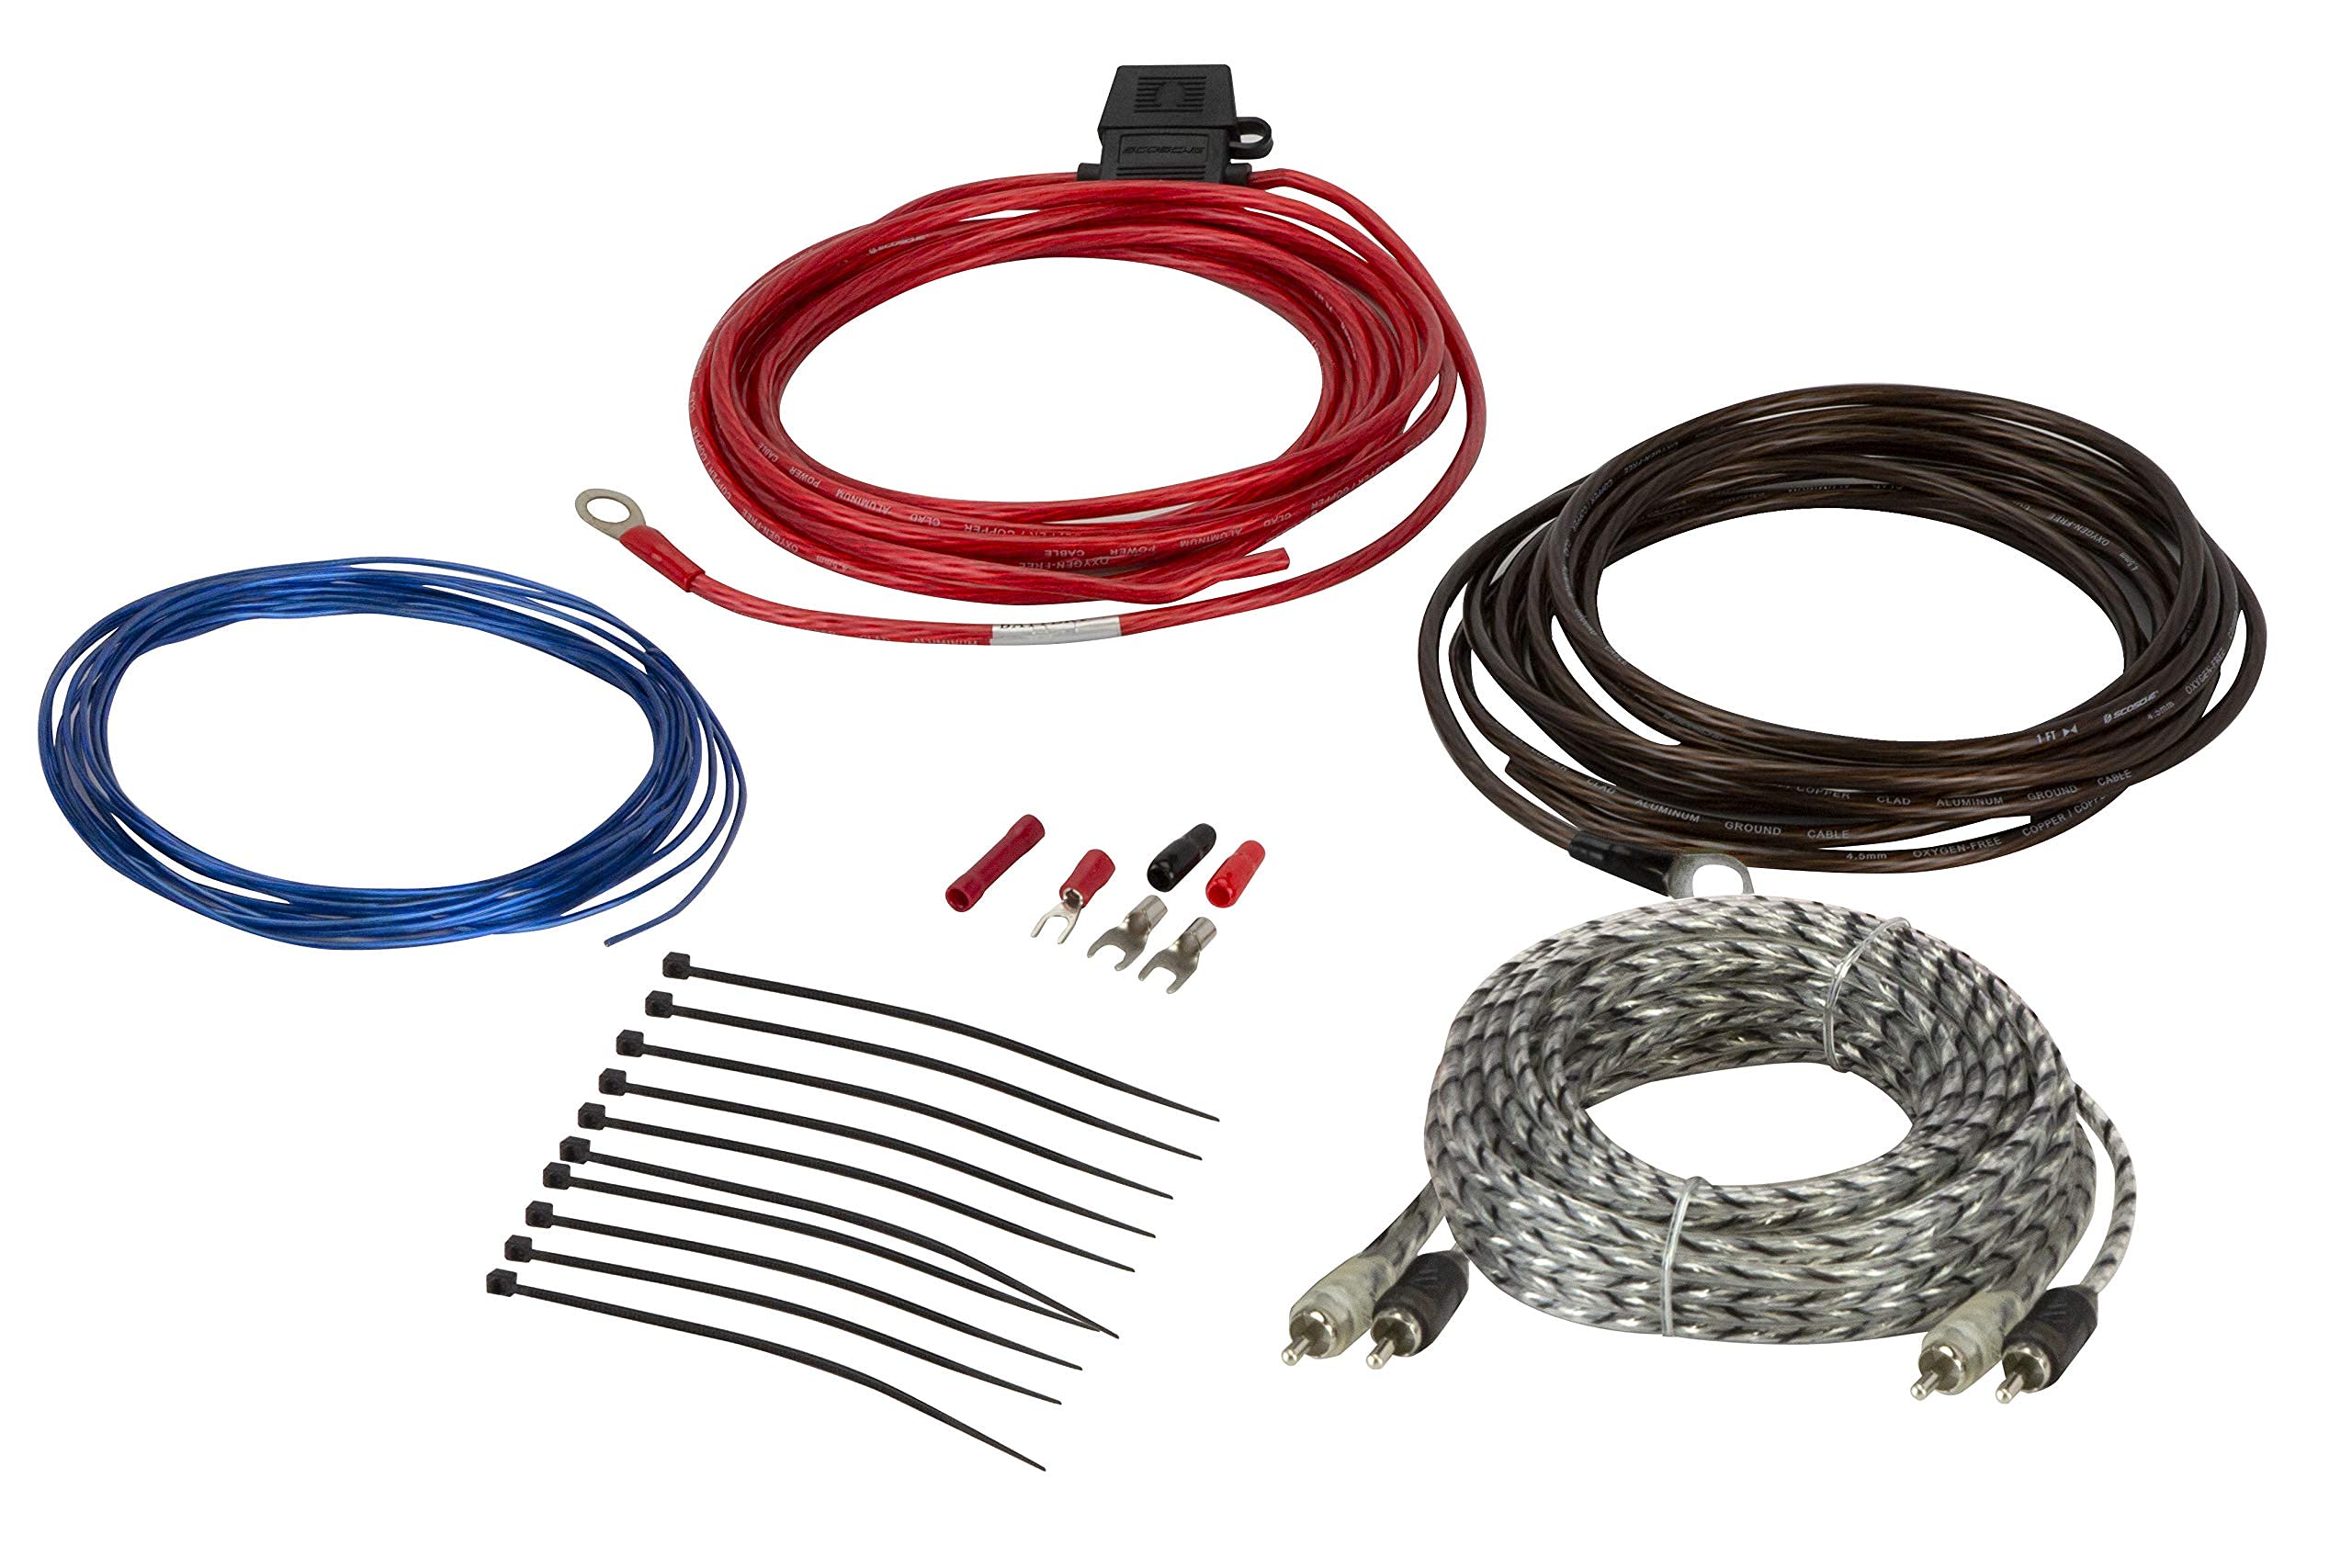 Scosche Install Centric ICAK12 True 12 Gauge Hybrid OFC 2-Channel High Current Amplifier Wiring Kit Accessory Installation Wiring Kit for Boat, Motorcycles, ATV’s and UTV’s